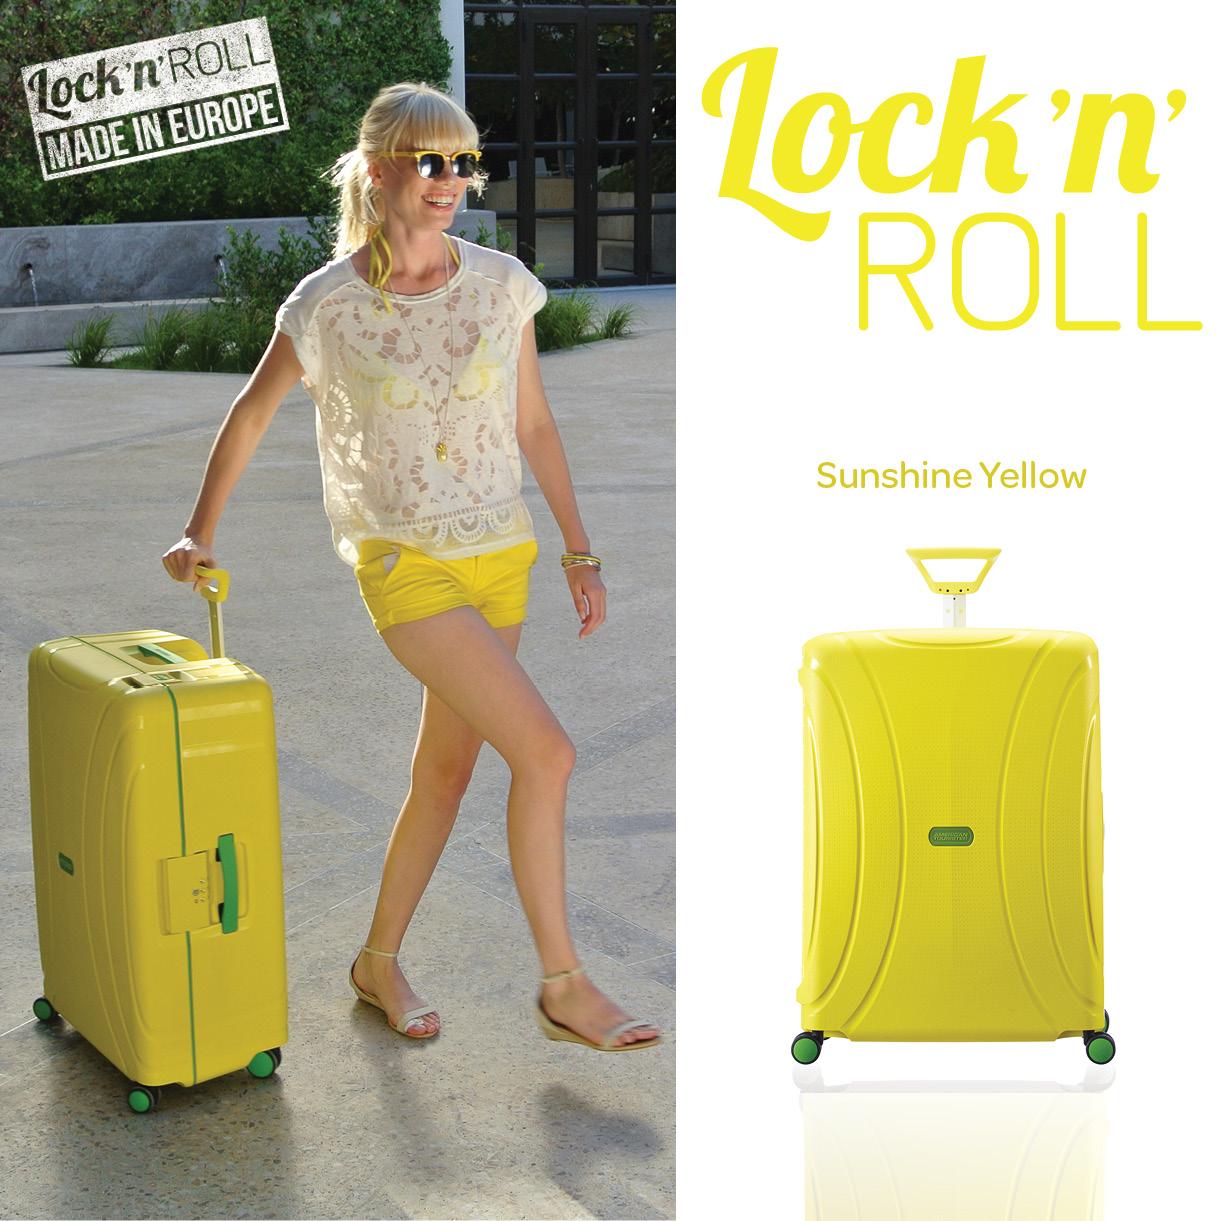 Brink motivet Bonde American Tourister on X: "When Life Calls, Be Ready with the new Lock' N'  Roll collection by American Tourister! #AmericanTourister  http://t.co/1fbE96k2pc" / X